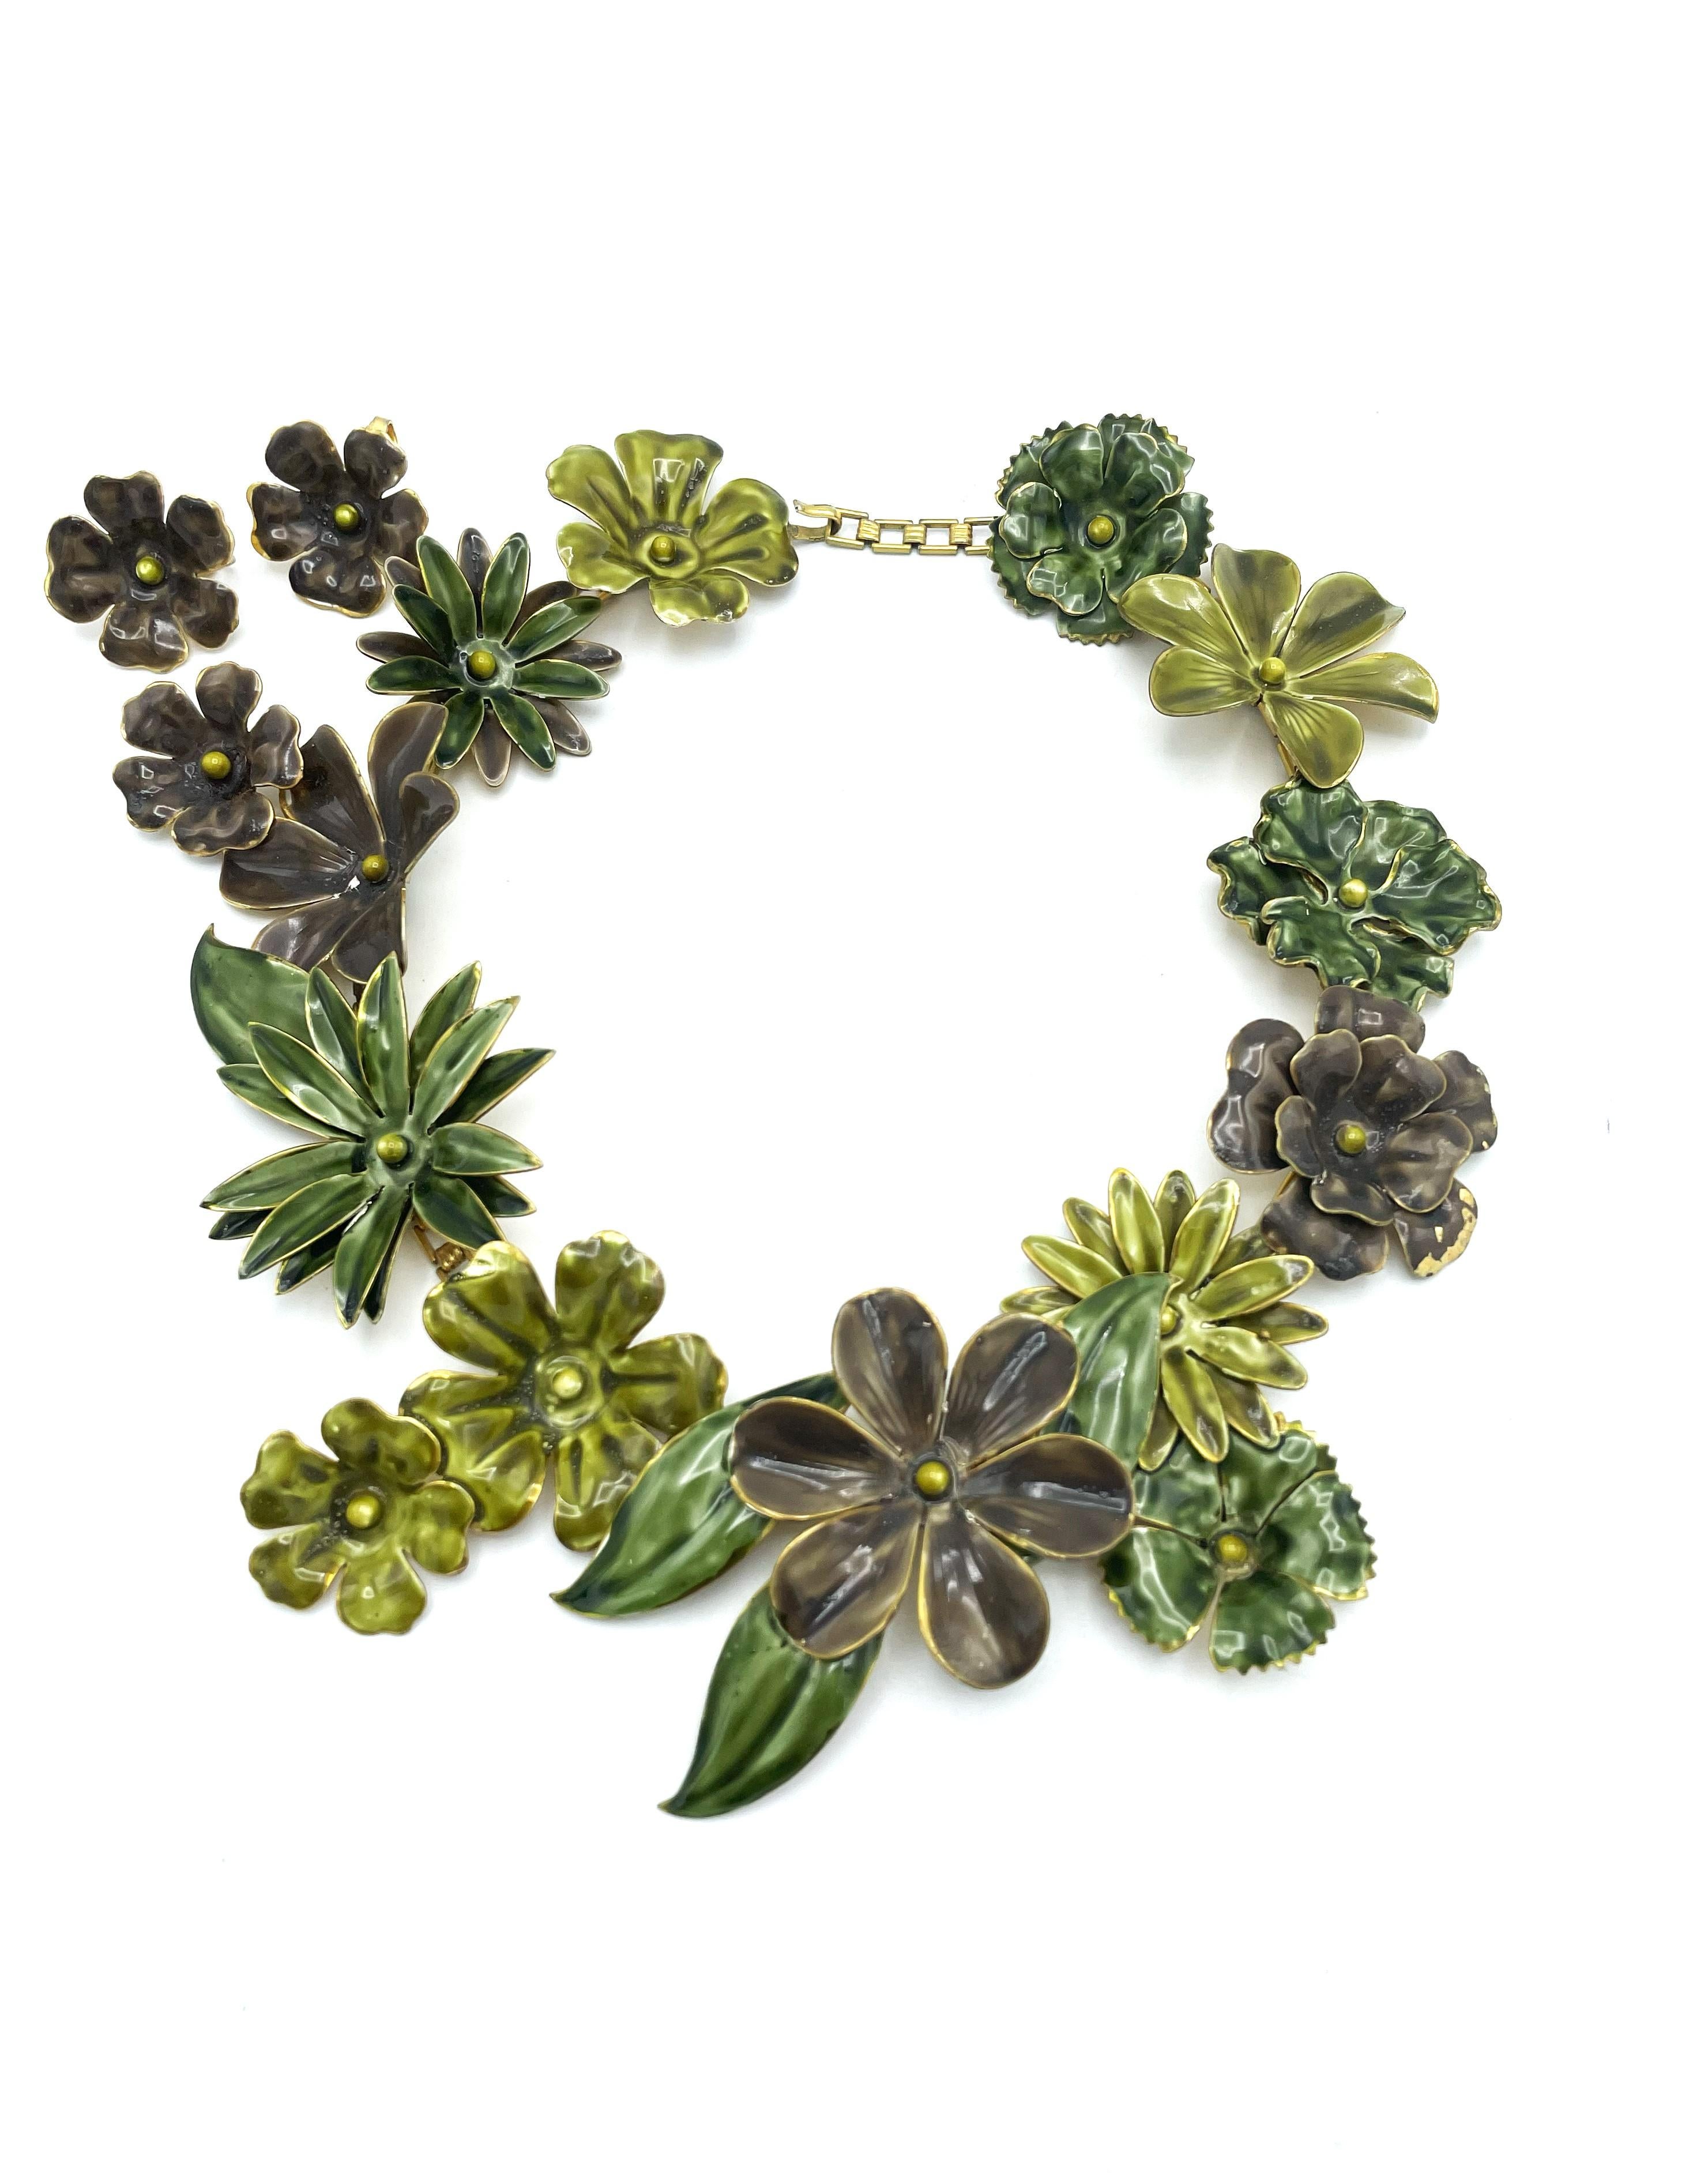 Romantic Larg hand enamelled metal floral motif necklace and earclips by SANDOR 1950's US For Sale